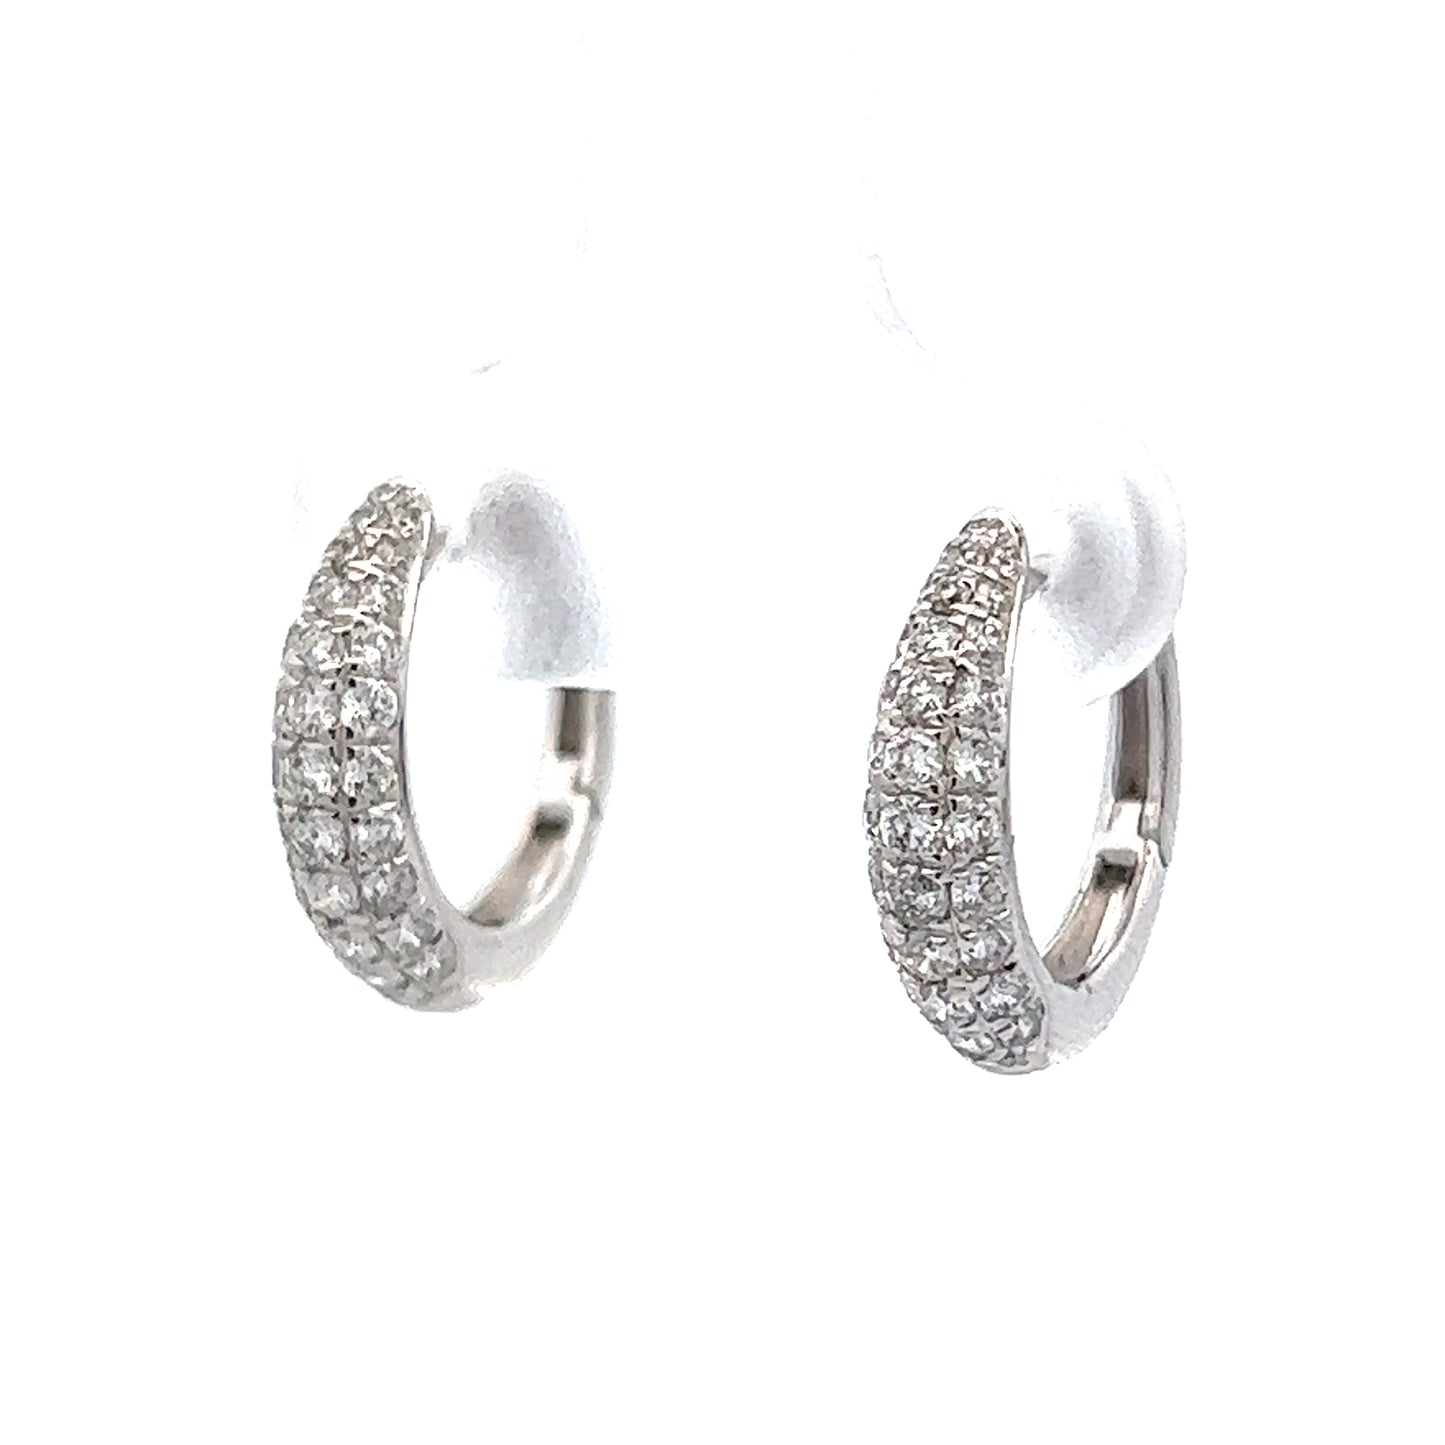 .77 Round Diamond Pave Hoop Earring in 14k White Gold